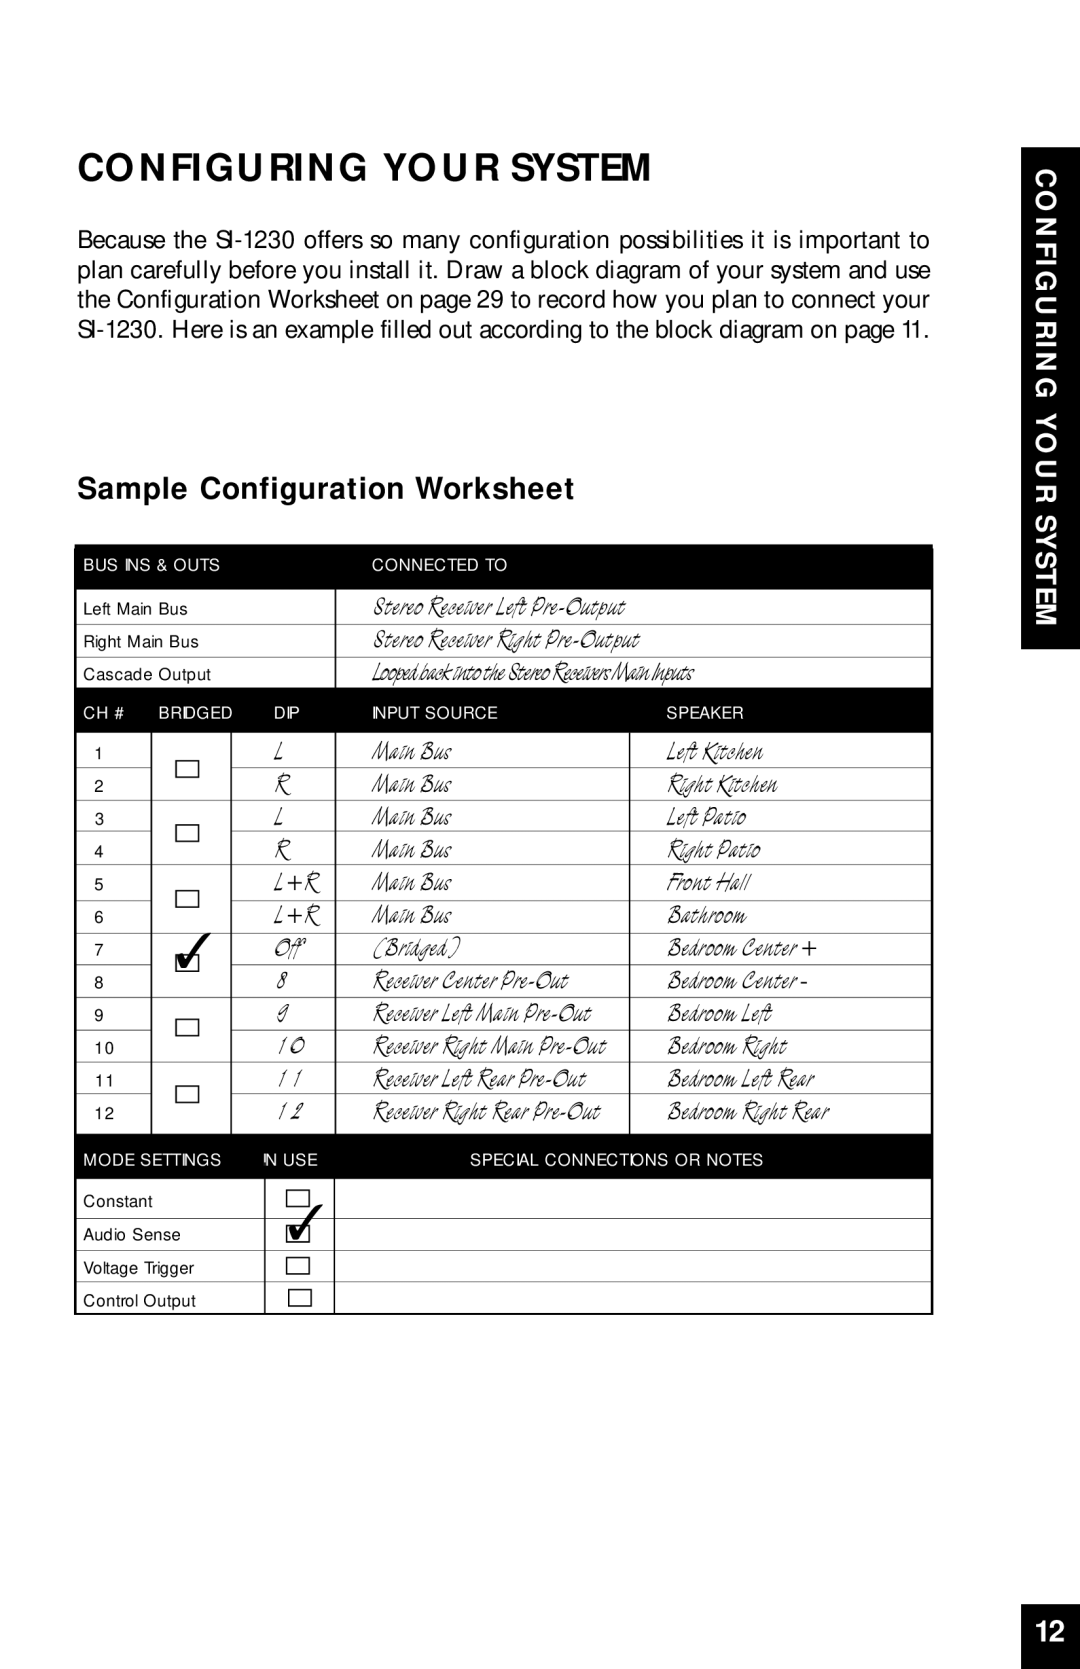 Niles Audio SI-1230 manual Configuring Your System, Sample Configuration Worksheet 